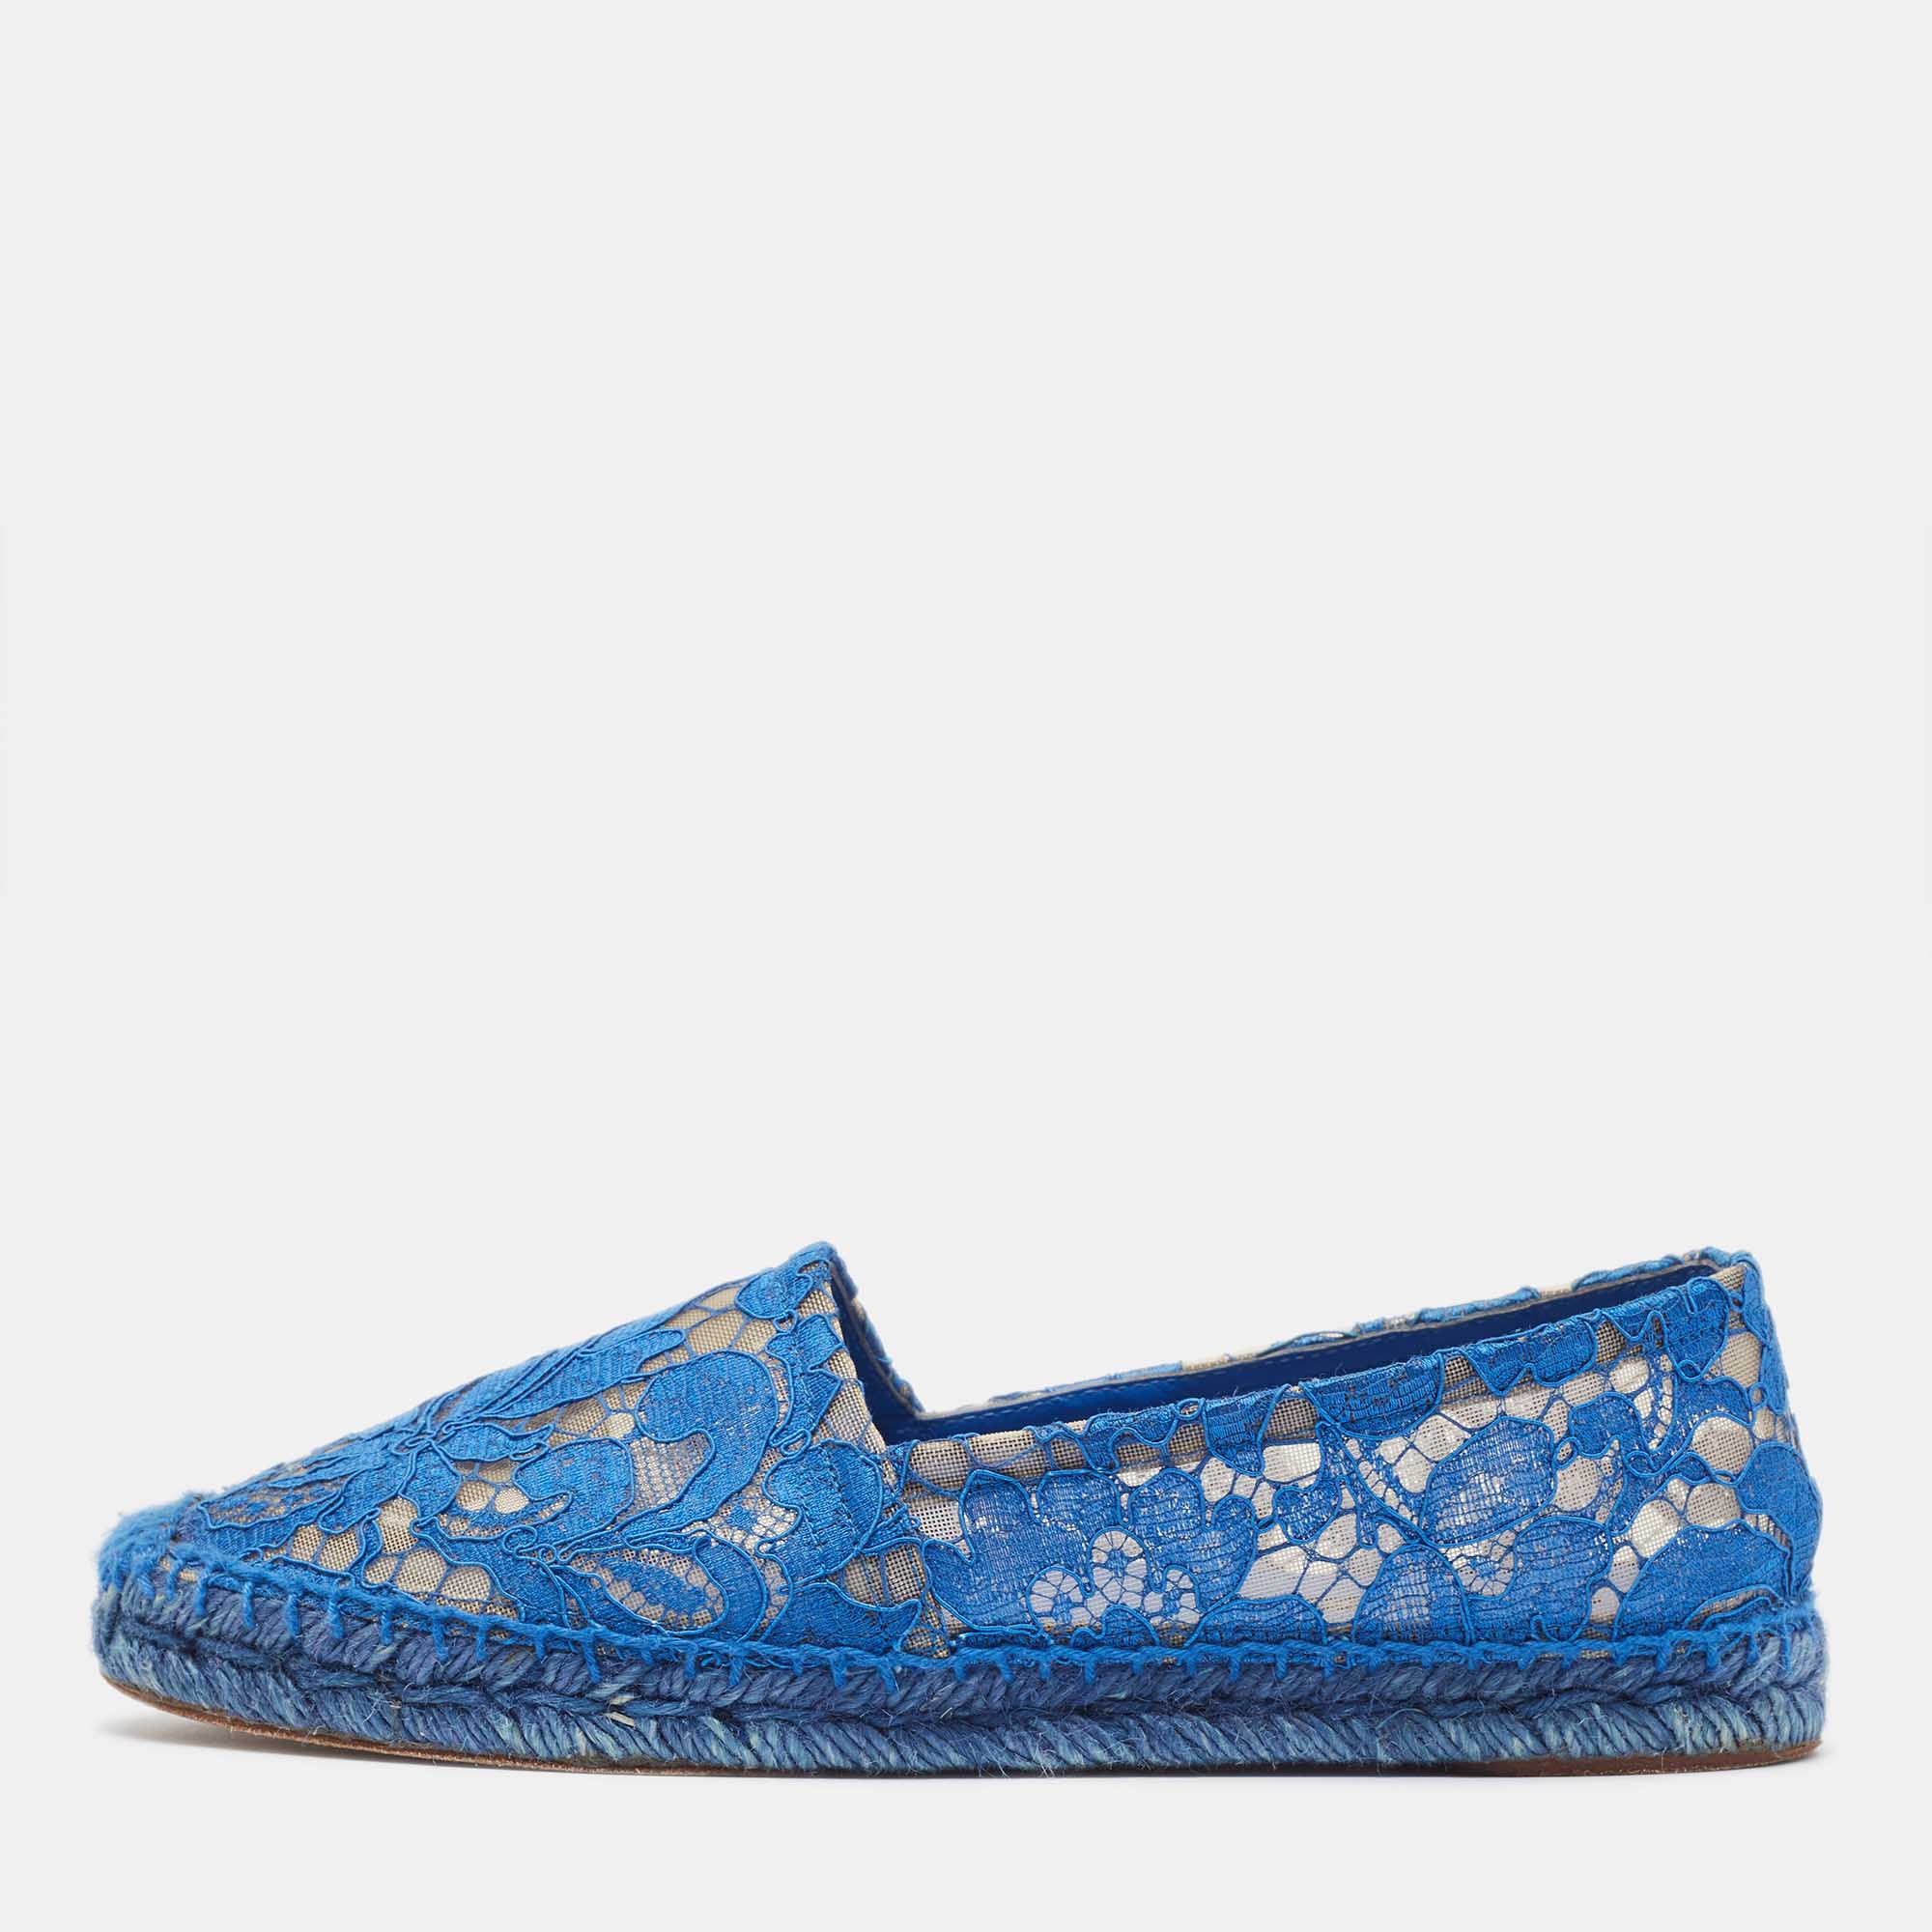 Dolce & Gabbana Blue Lace and Mesh Espadrille Flats Size 38